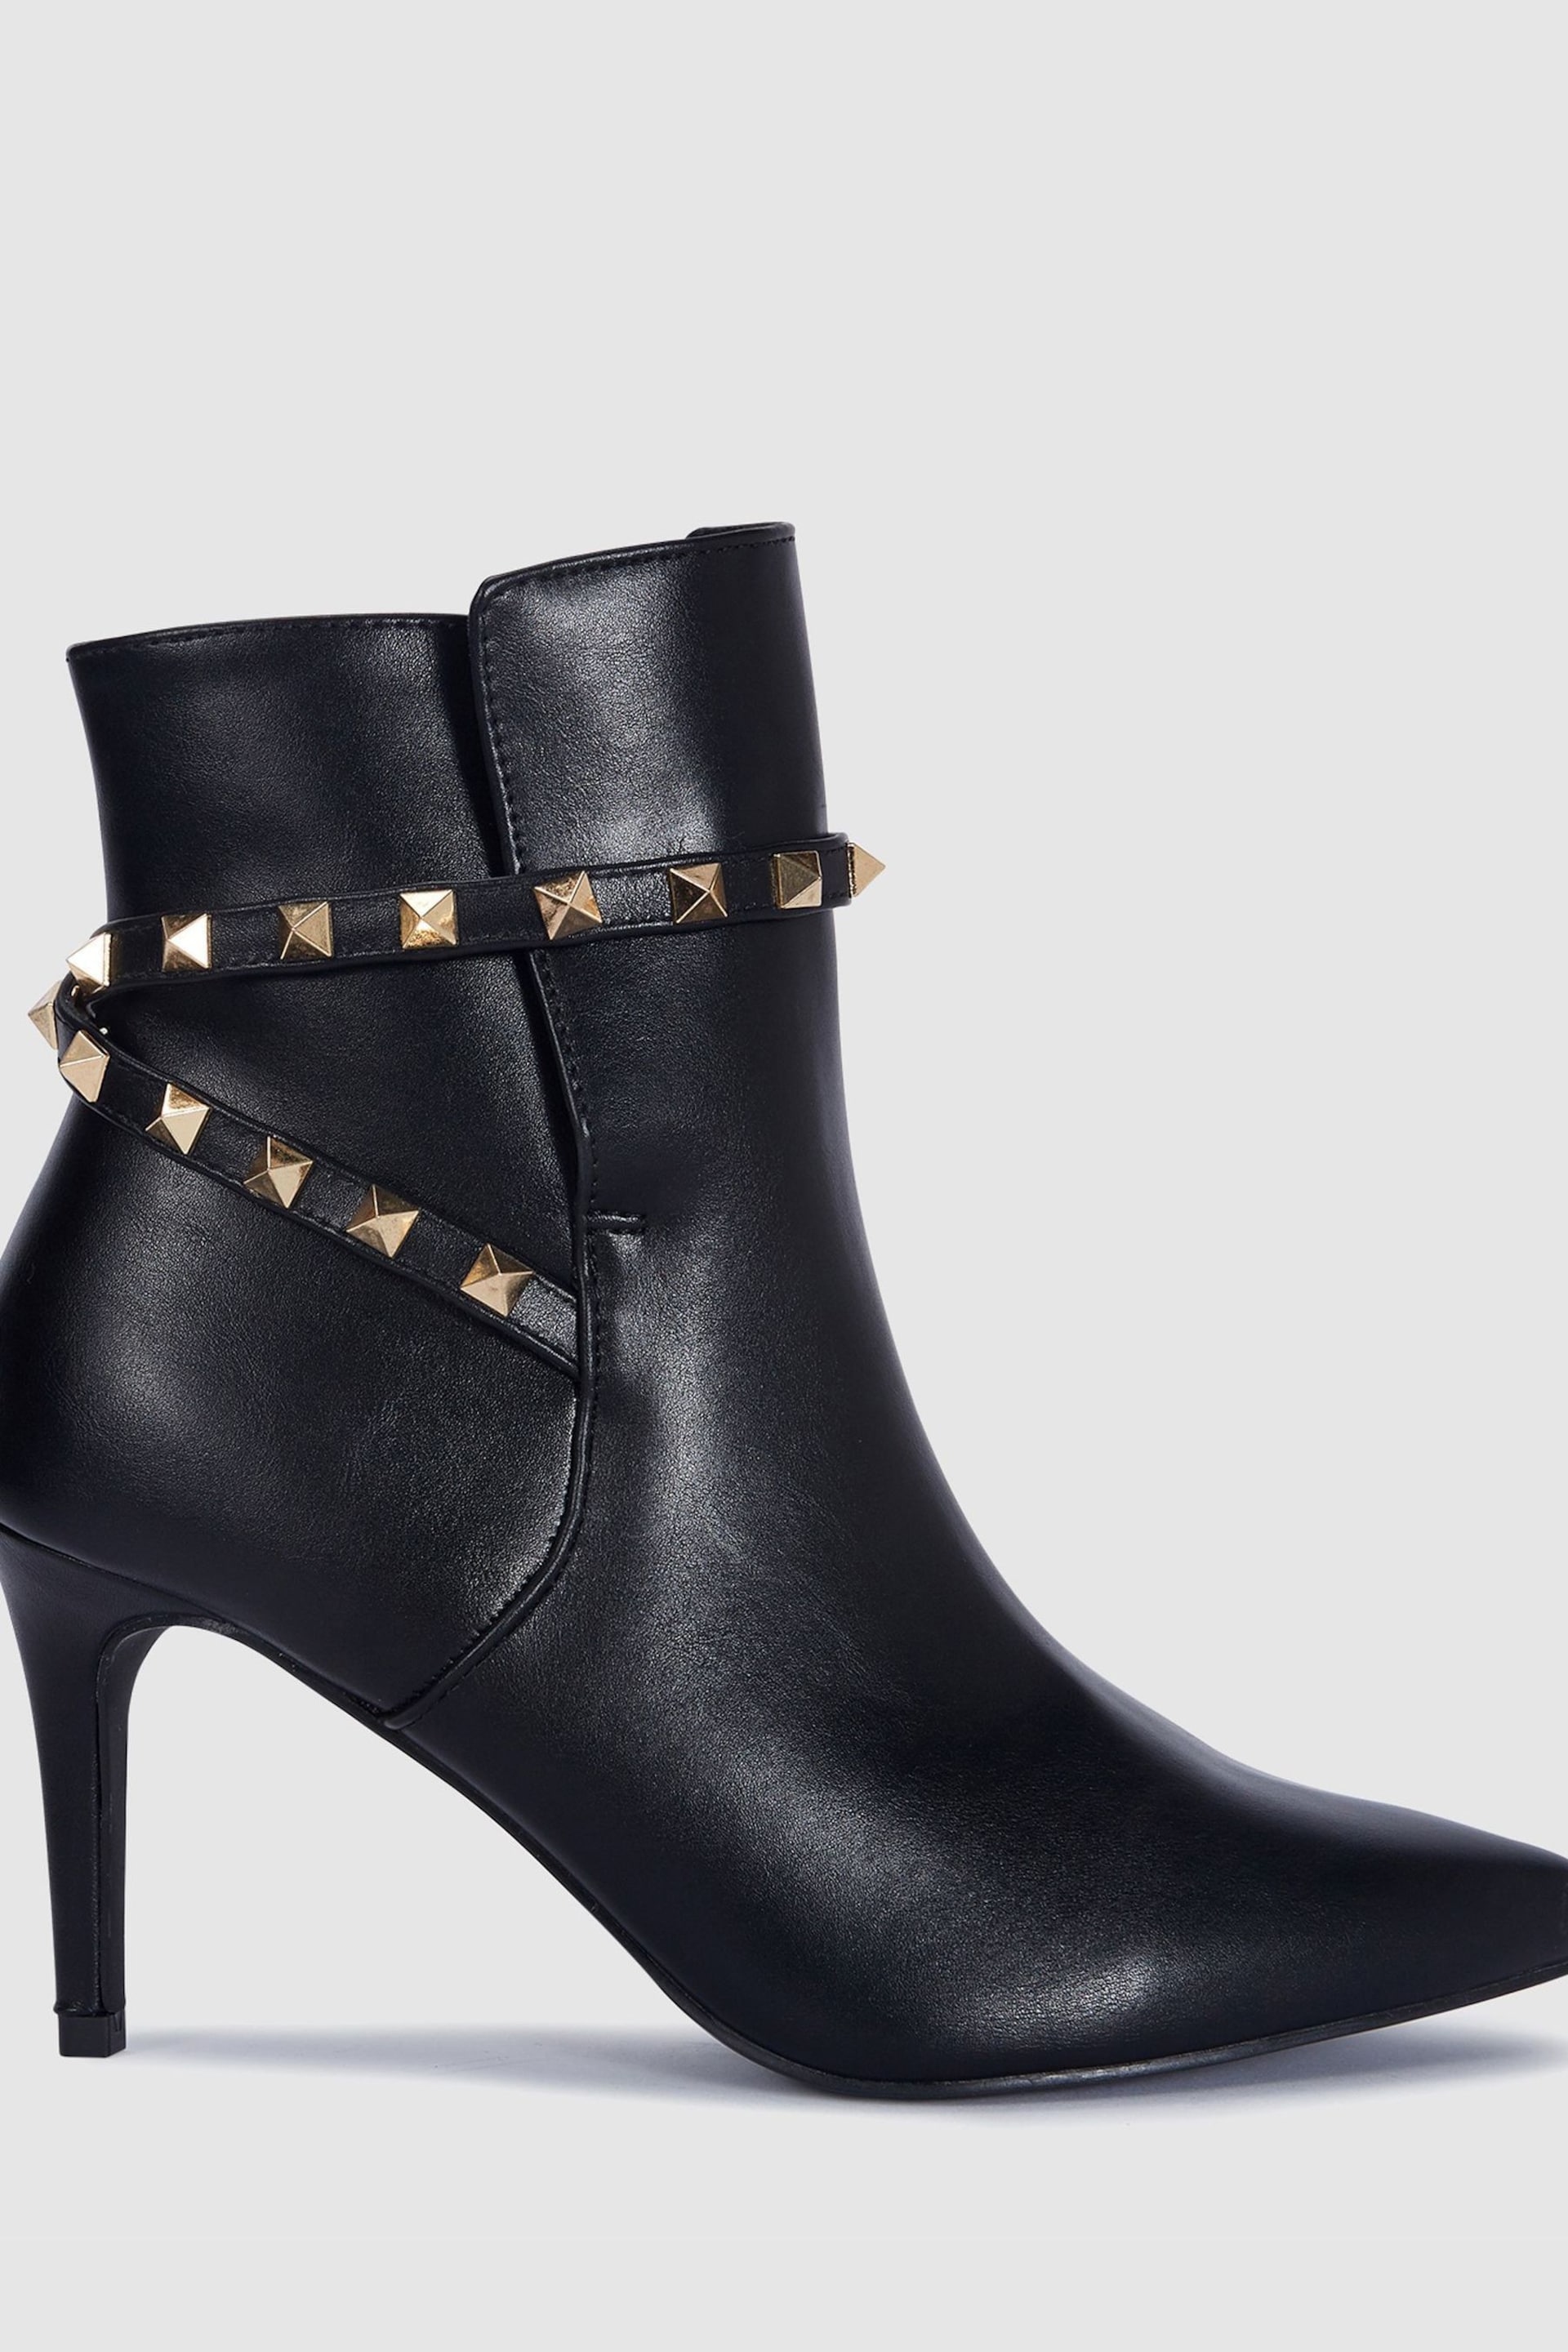 Novo Black Wide Fit Wide Fit Diego Stud Detail Point Stiletto Heel Ankle Boots - Image 2 of 4